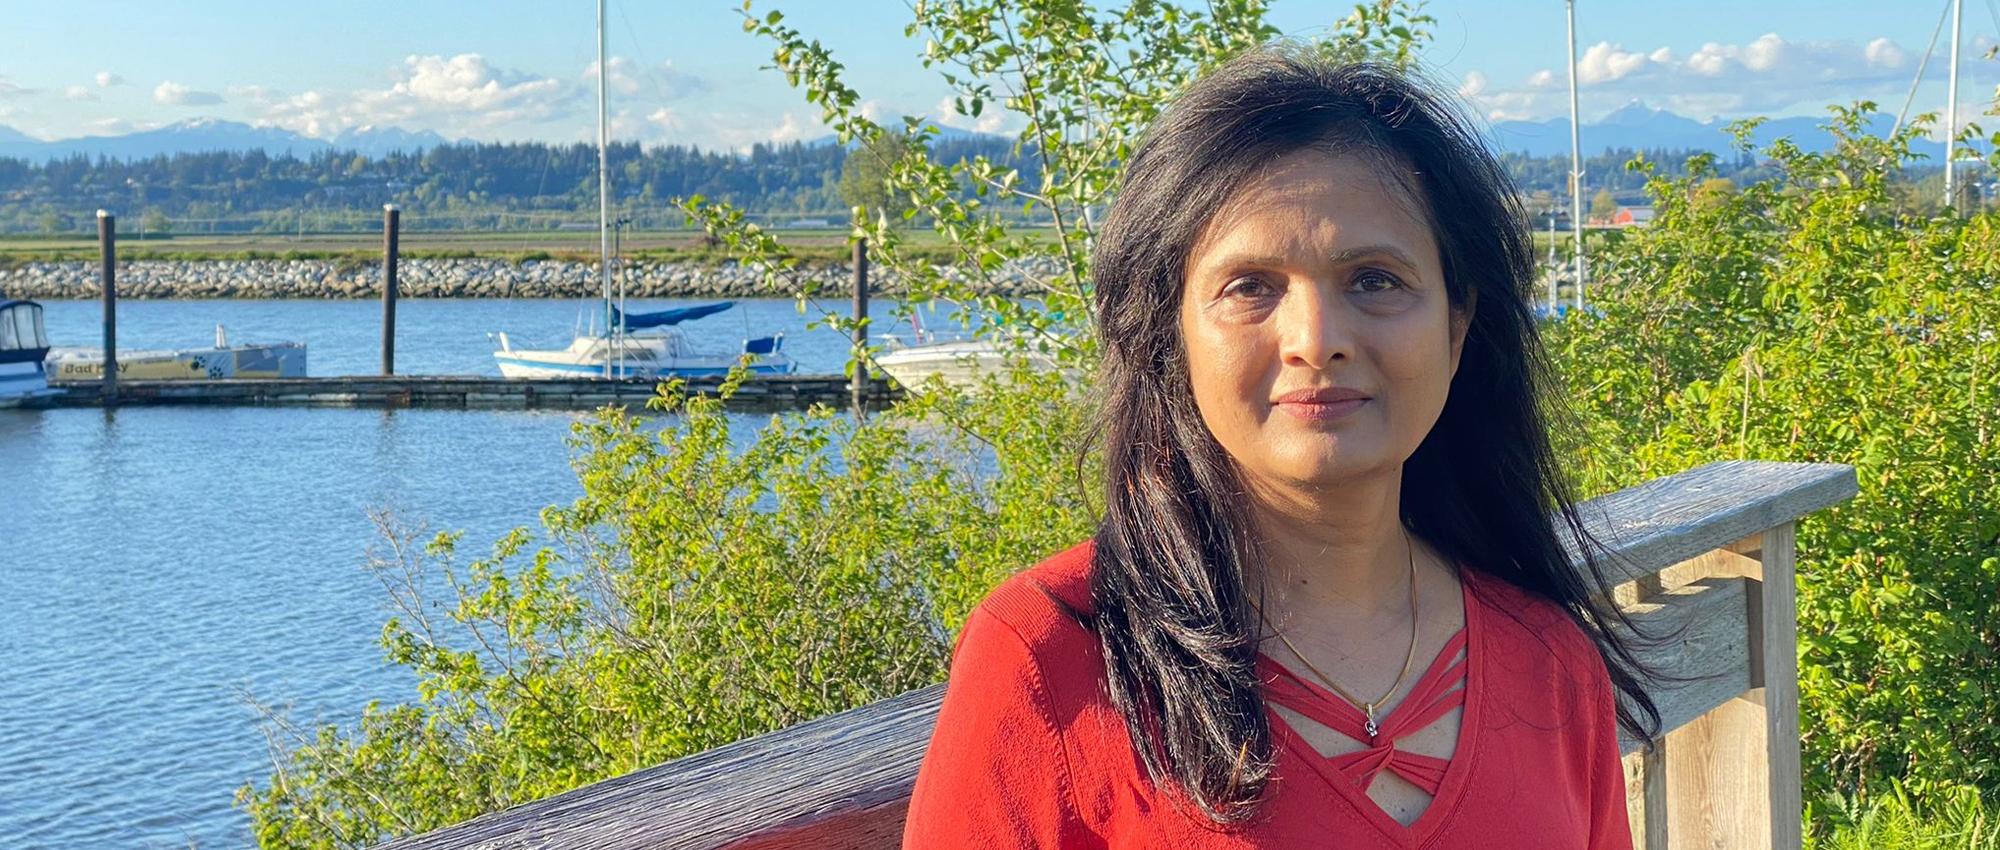 Canadian Blood Services donor care associate in Vancouver’s lower mainland poses on a wooden deck by a lake. There are green plants and boats behind her.